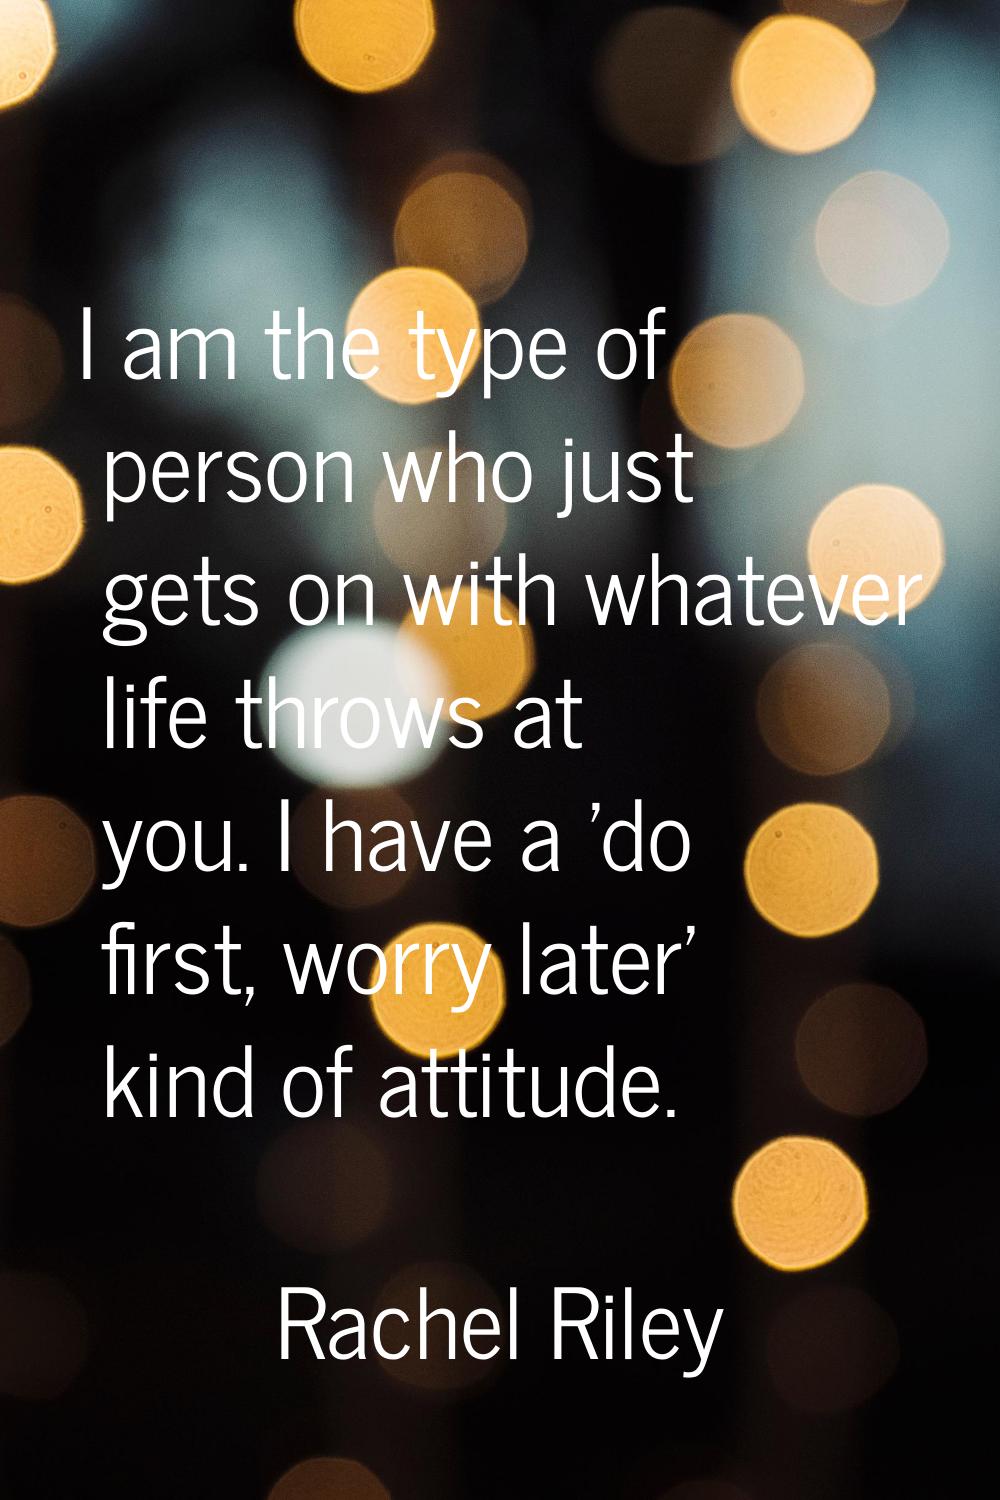 I am the type of person who just gets on with whatever life throws at you. I have a 'do first, worr